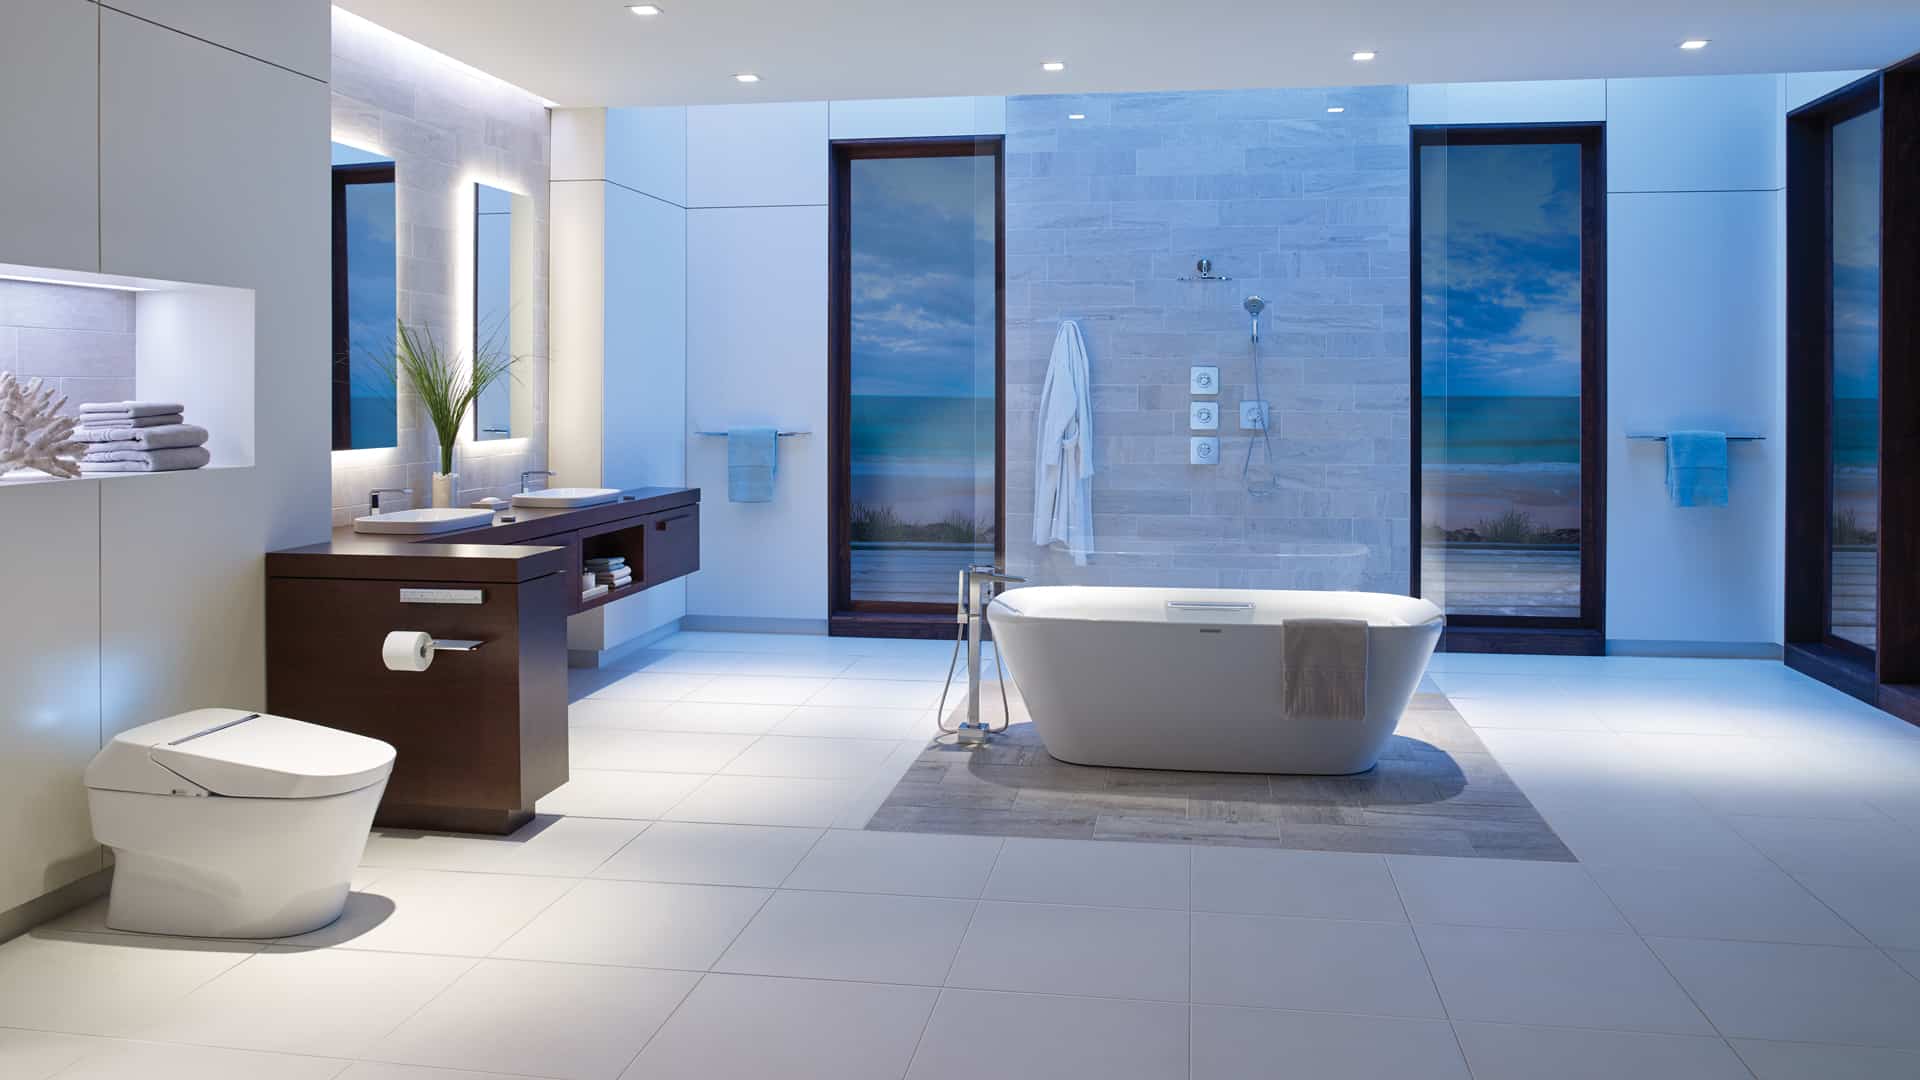 A modern bathroom with a bathtub, sink and toilet. The bathroom offers a minimalist design with sleek fixtures and contemporary amenities for optimum comfort.